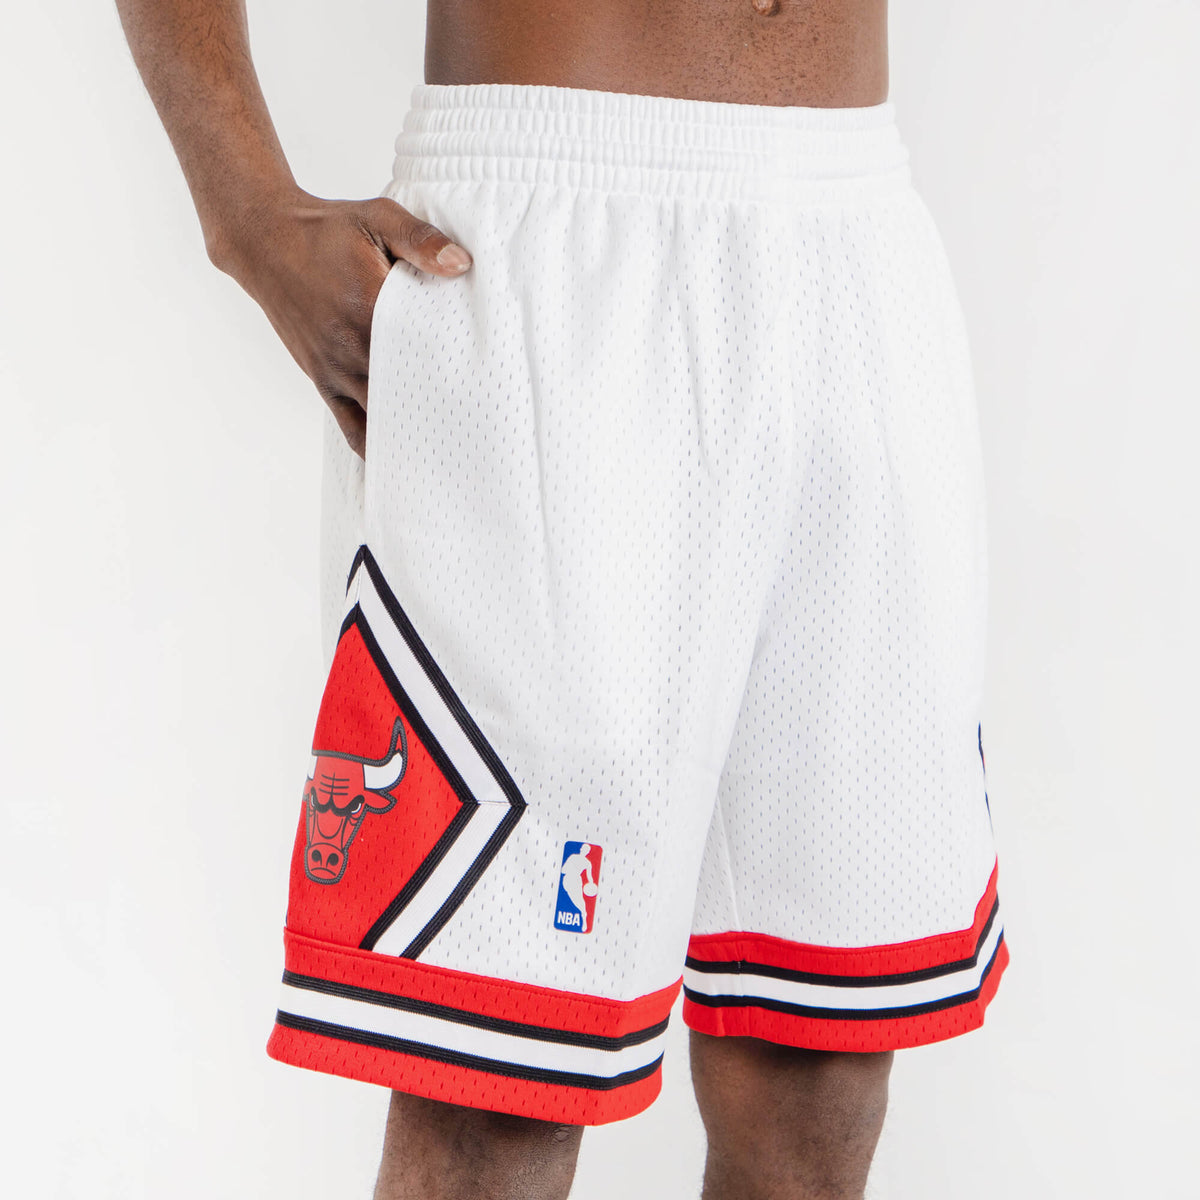 Chicago 'Bulls' Basketball Shorts (Green) – Jerseys and Sneakers